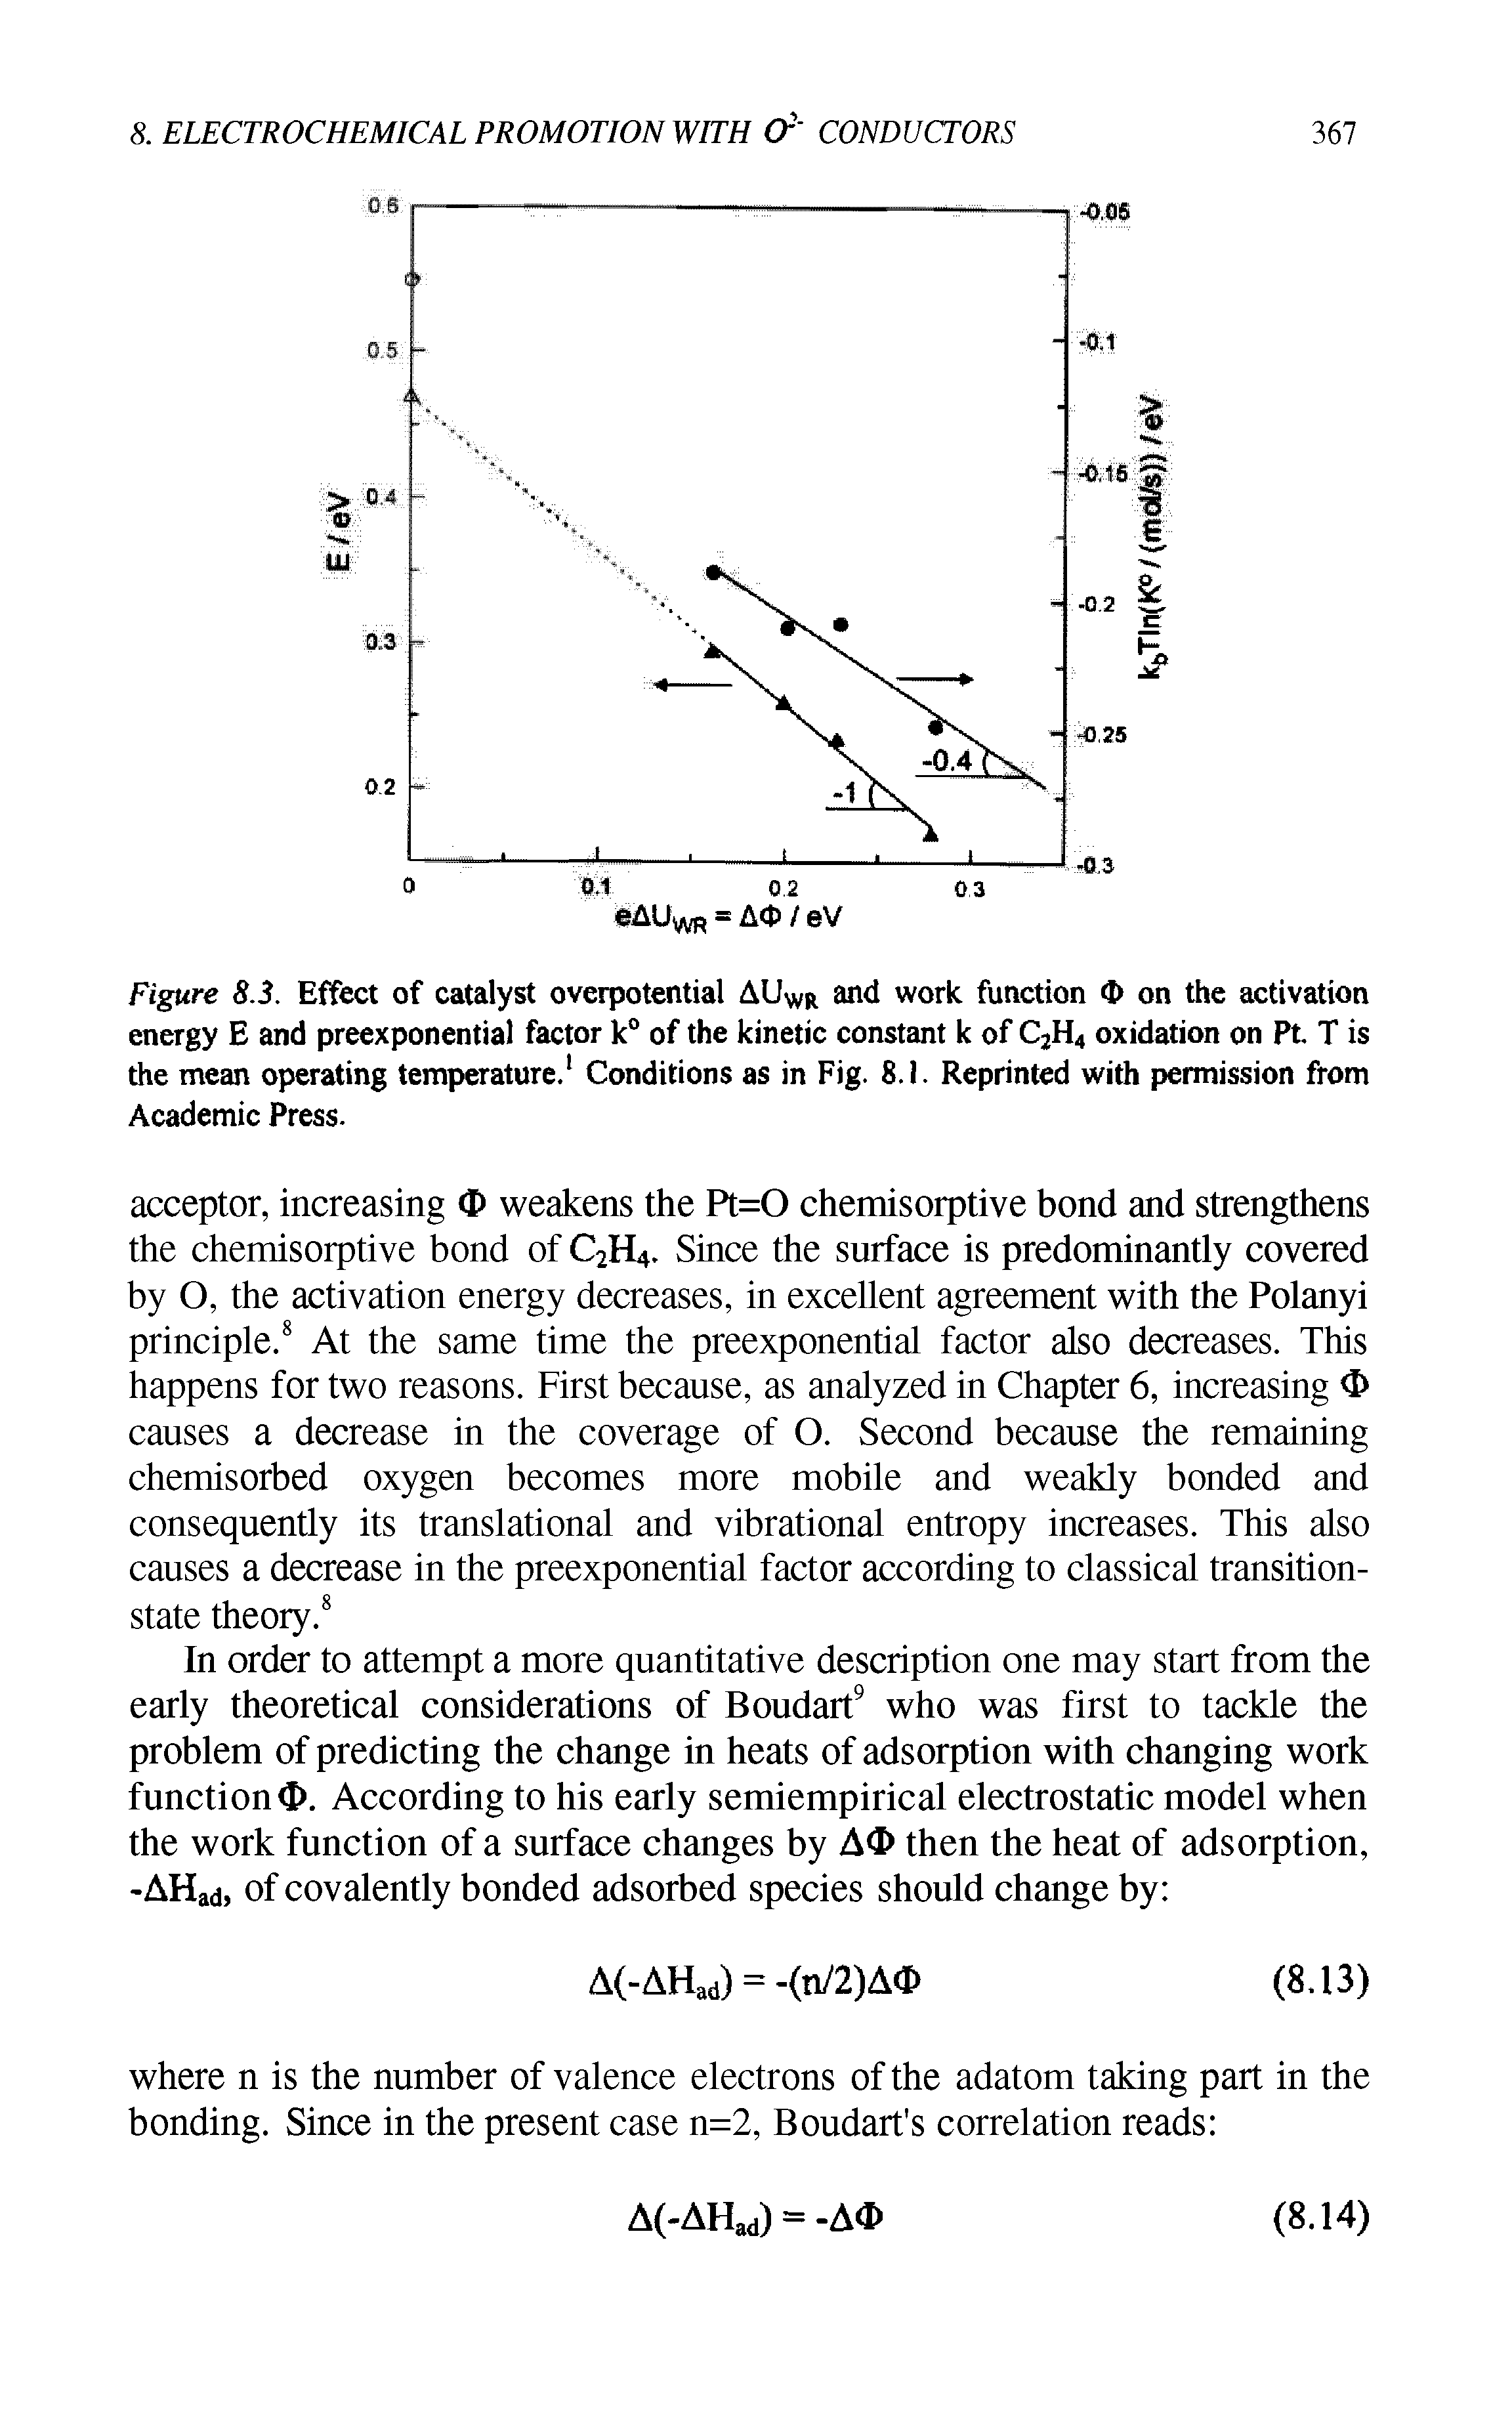 Figure 8.3. Effect of catalyst overpotential AUWR and work function <D on the activation energy E and preexponential factor k° of the kinetic constant k of C2H4 oxidation on Pt. T is the mean operating temperature.1 Conditions as in Fig. 8.1. Reprinted with permission from Academic Press.